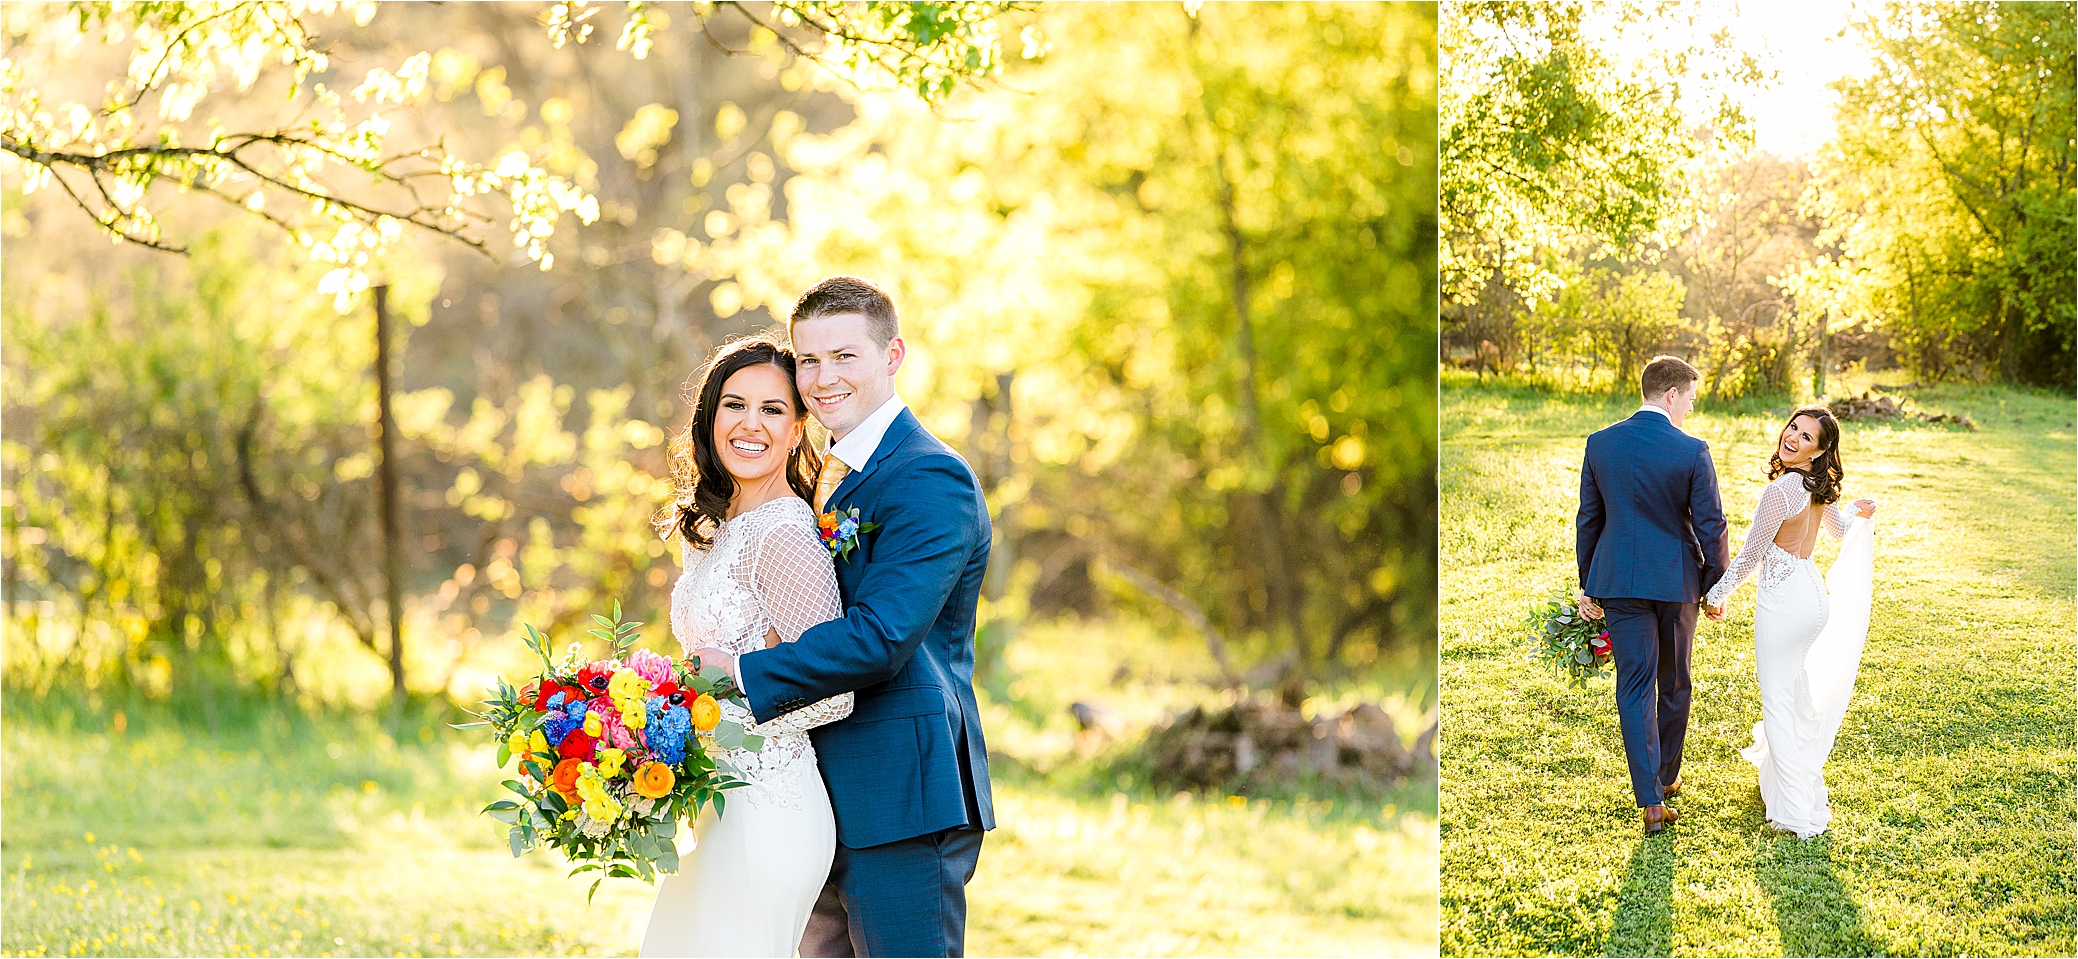 A couple hugs and a bride looks back during golden hour wedding portraits at PIneway Farms 